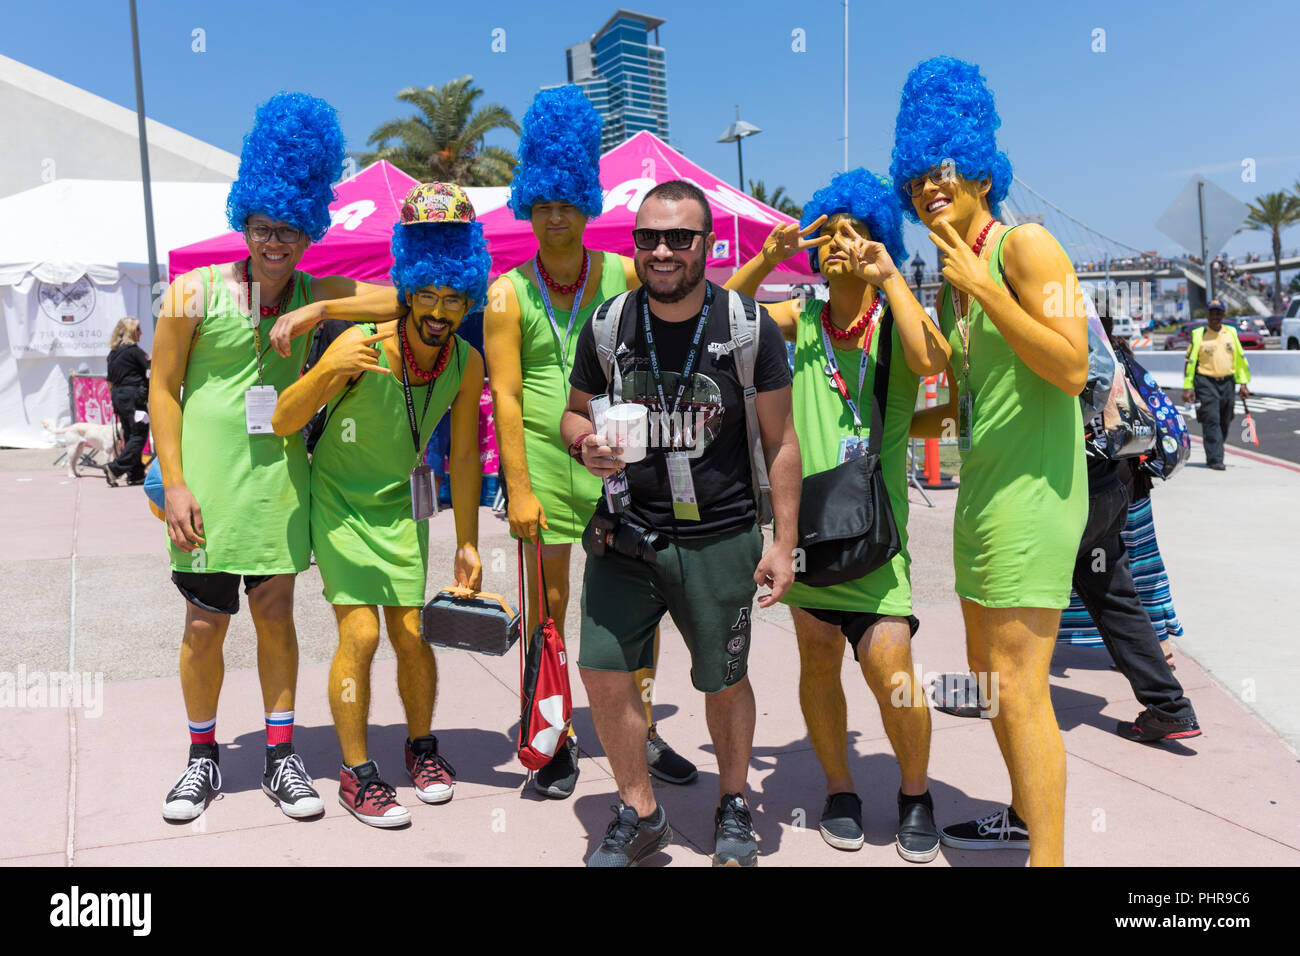 Marge Simpson group cosplay at San Diego Comic Con 2018 Stock Photo